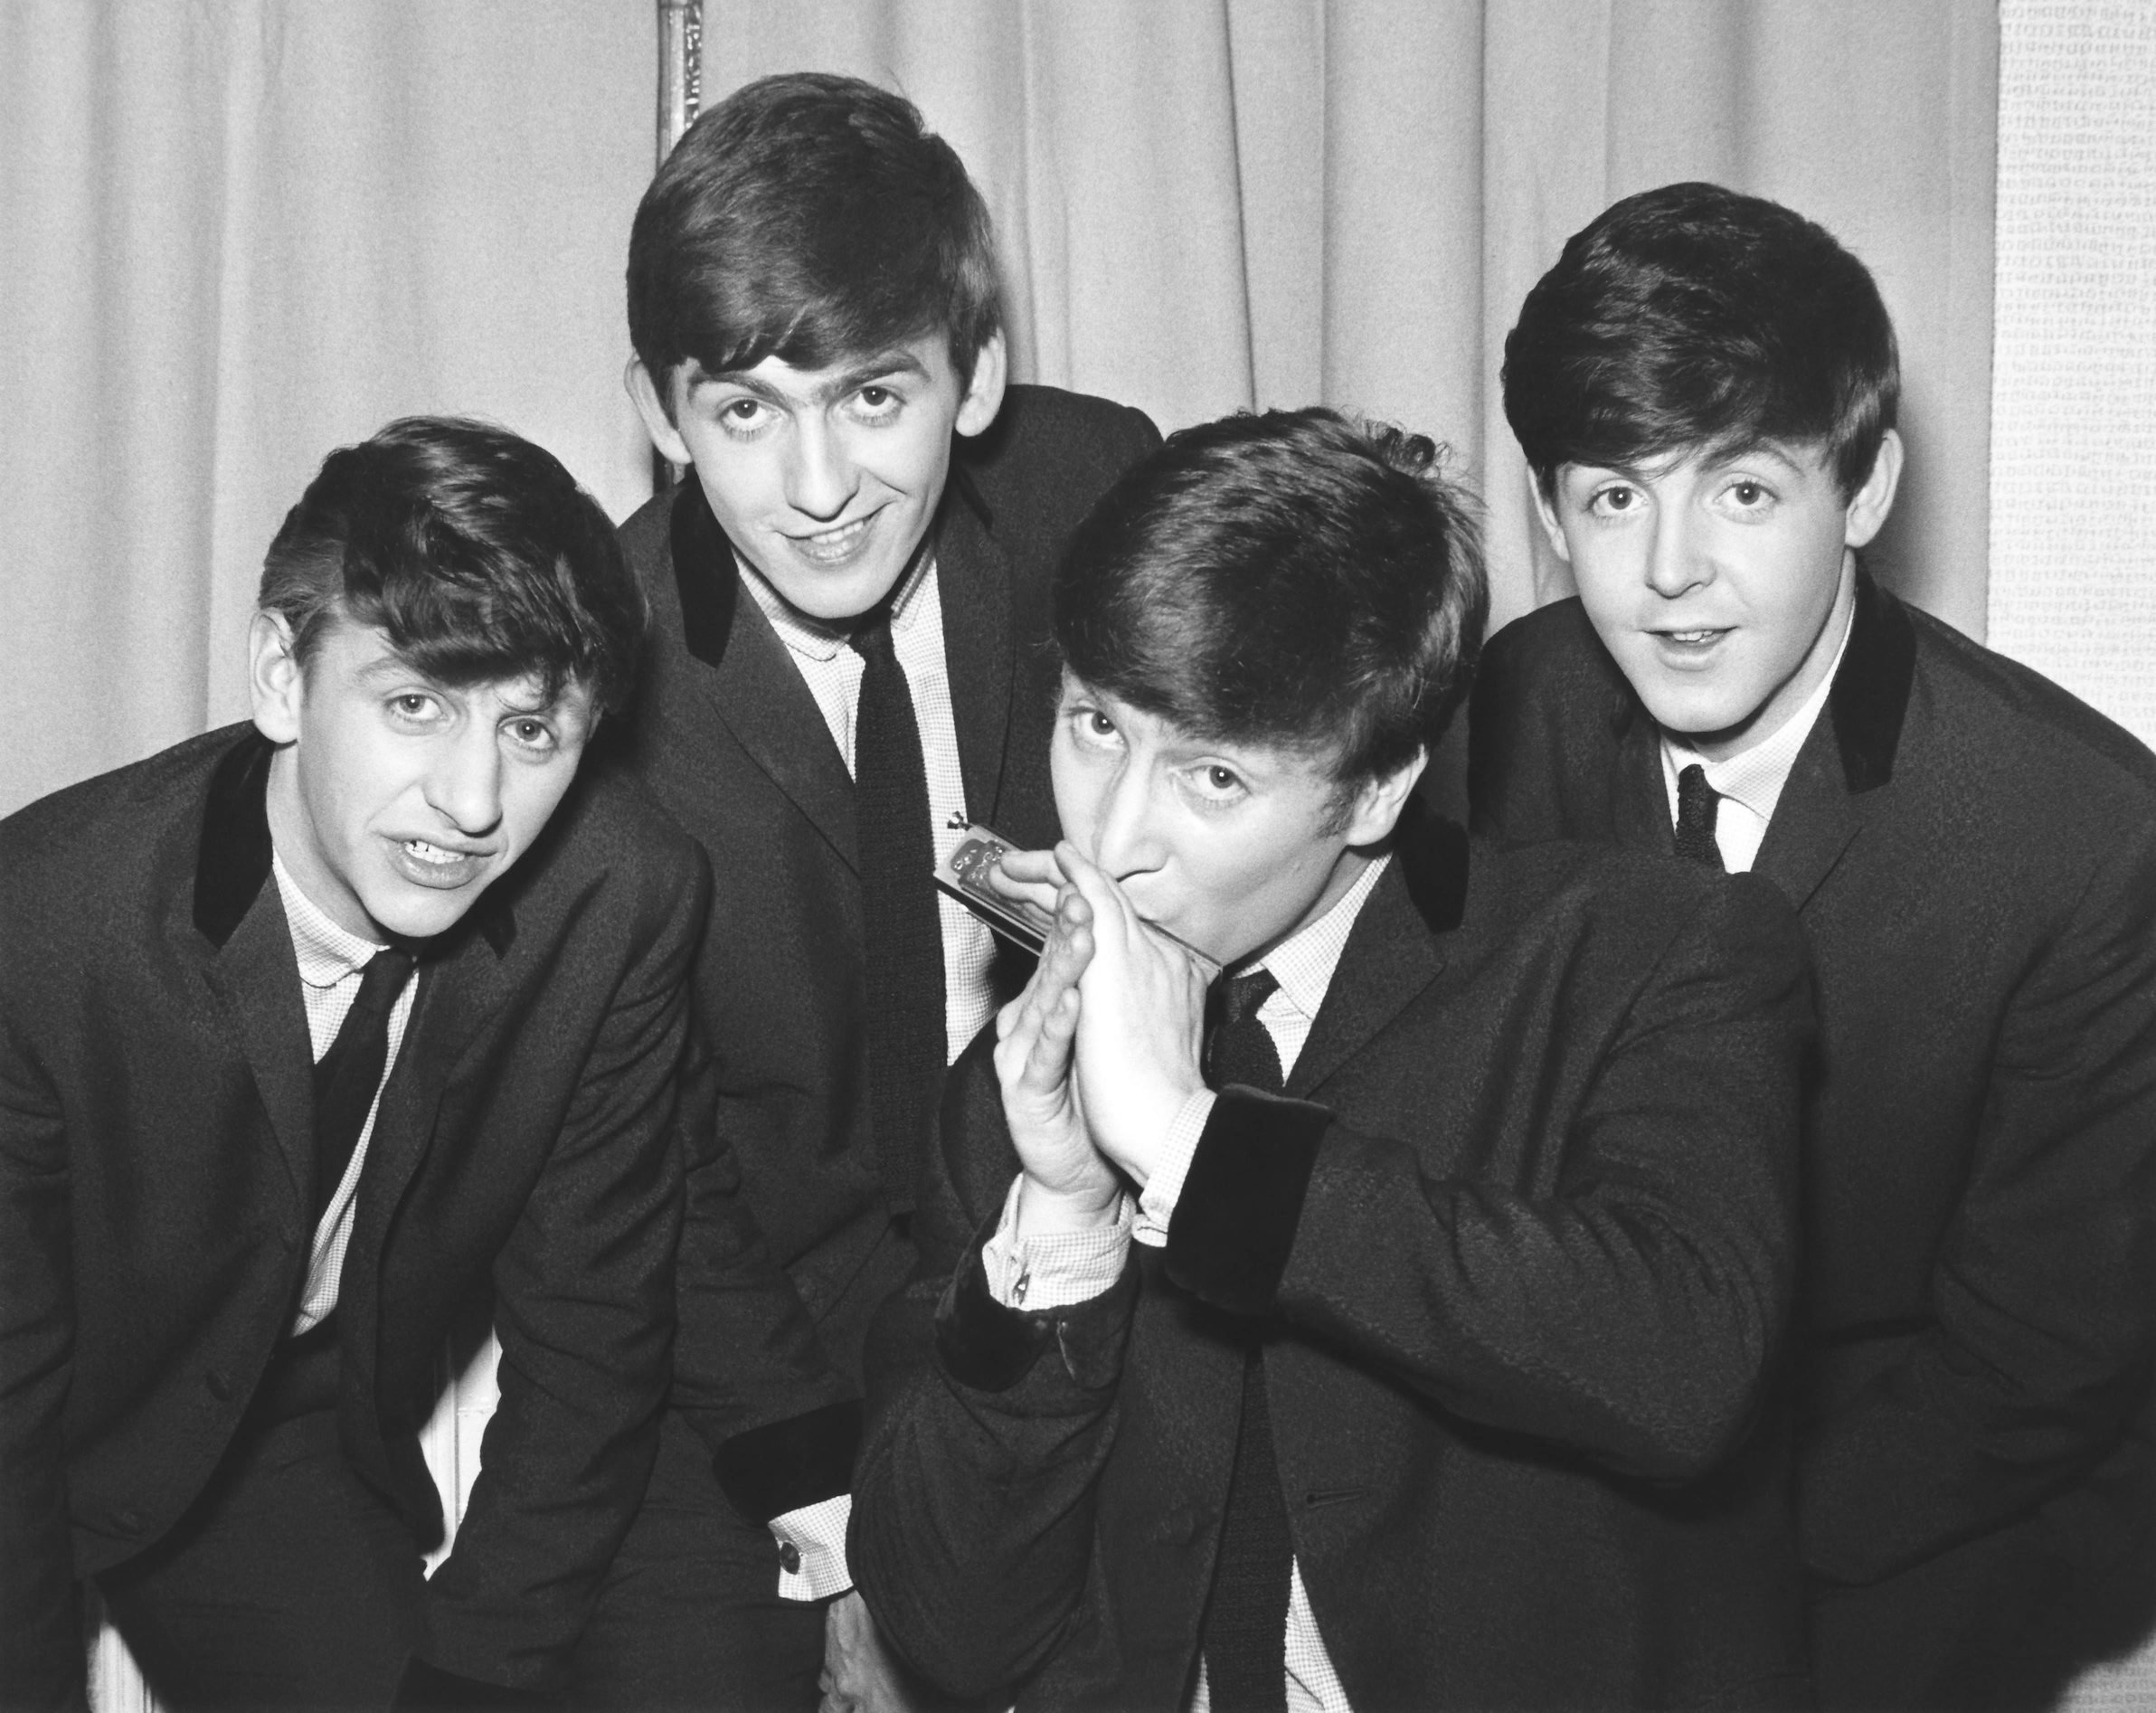 The Beatles pose for an early group portrait